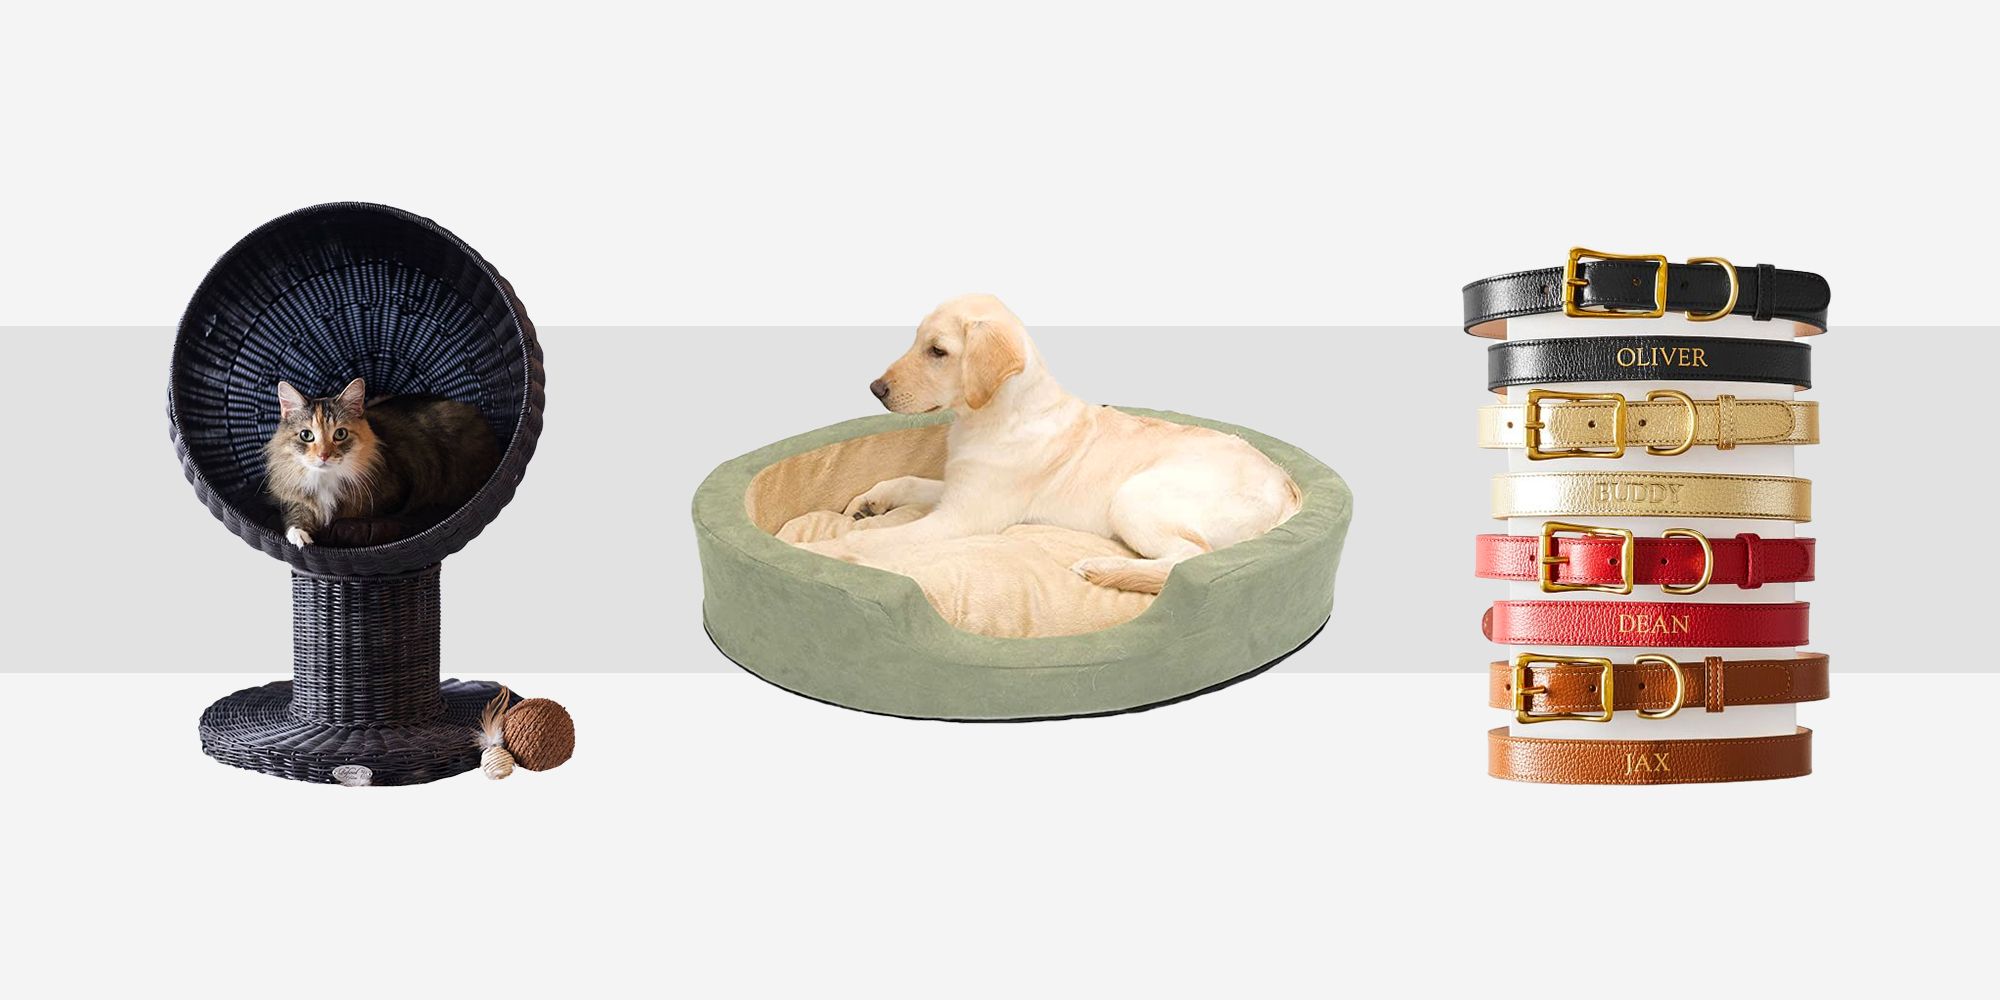 30+ Best Pet Gifts For 2023 - Unique Gifts For Dogs & Cats